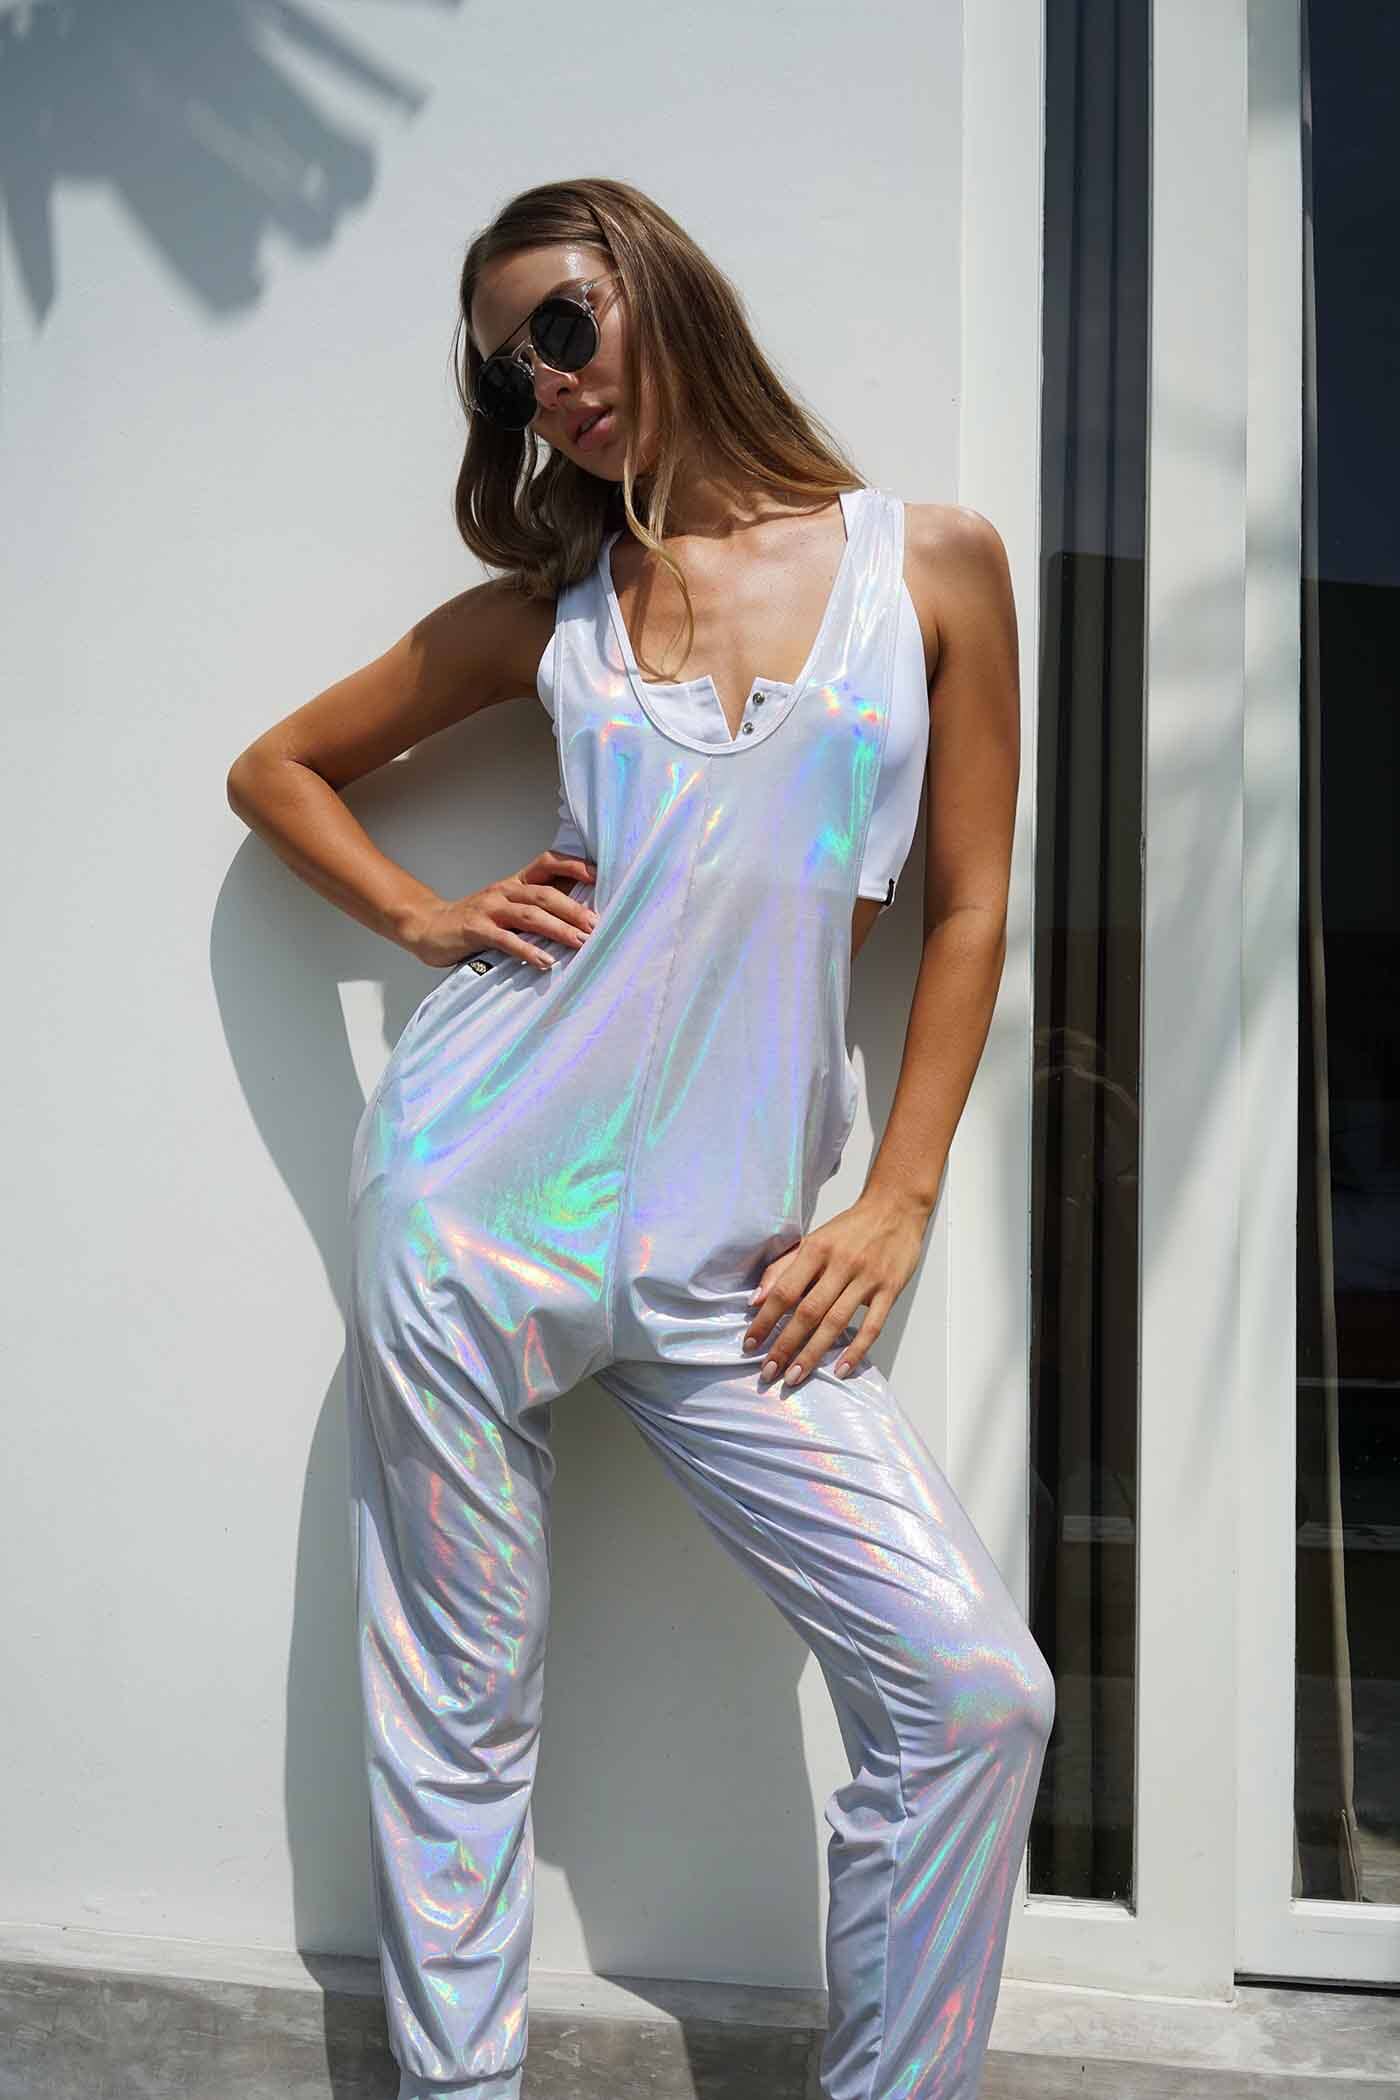 Frosted Womens Shiny Holographic Overalls From Love Khaos Festival Clothing Brand